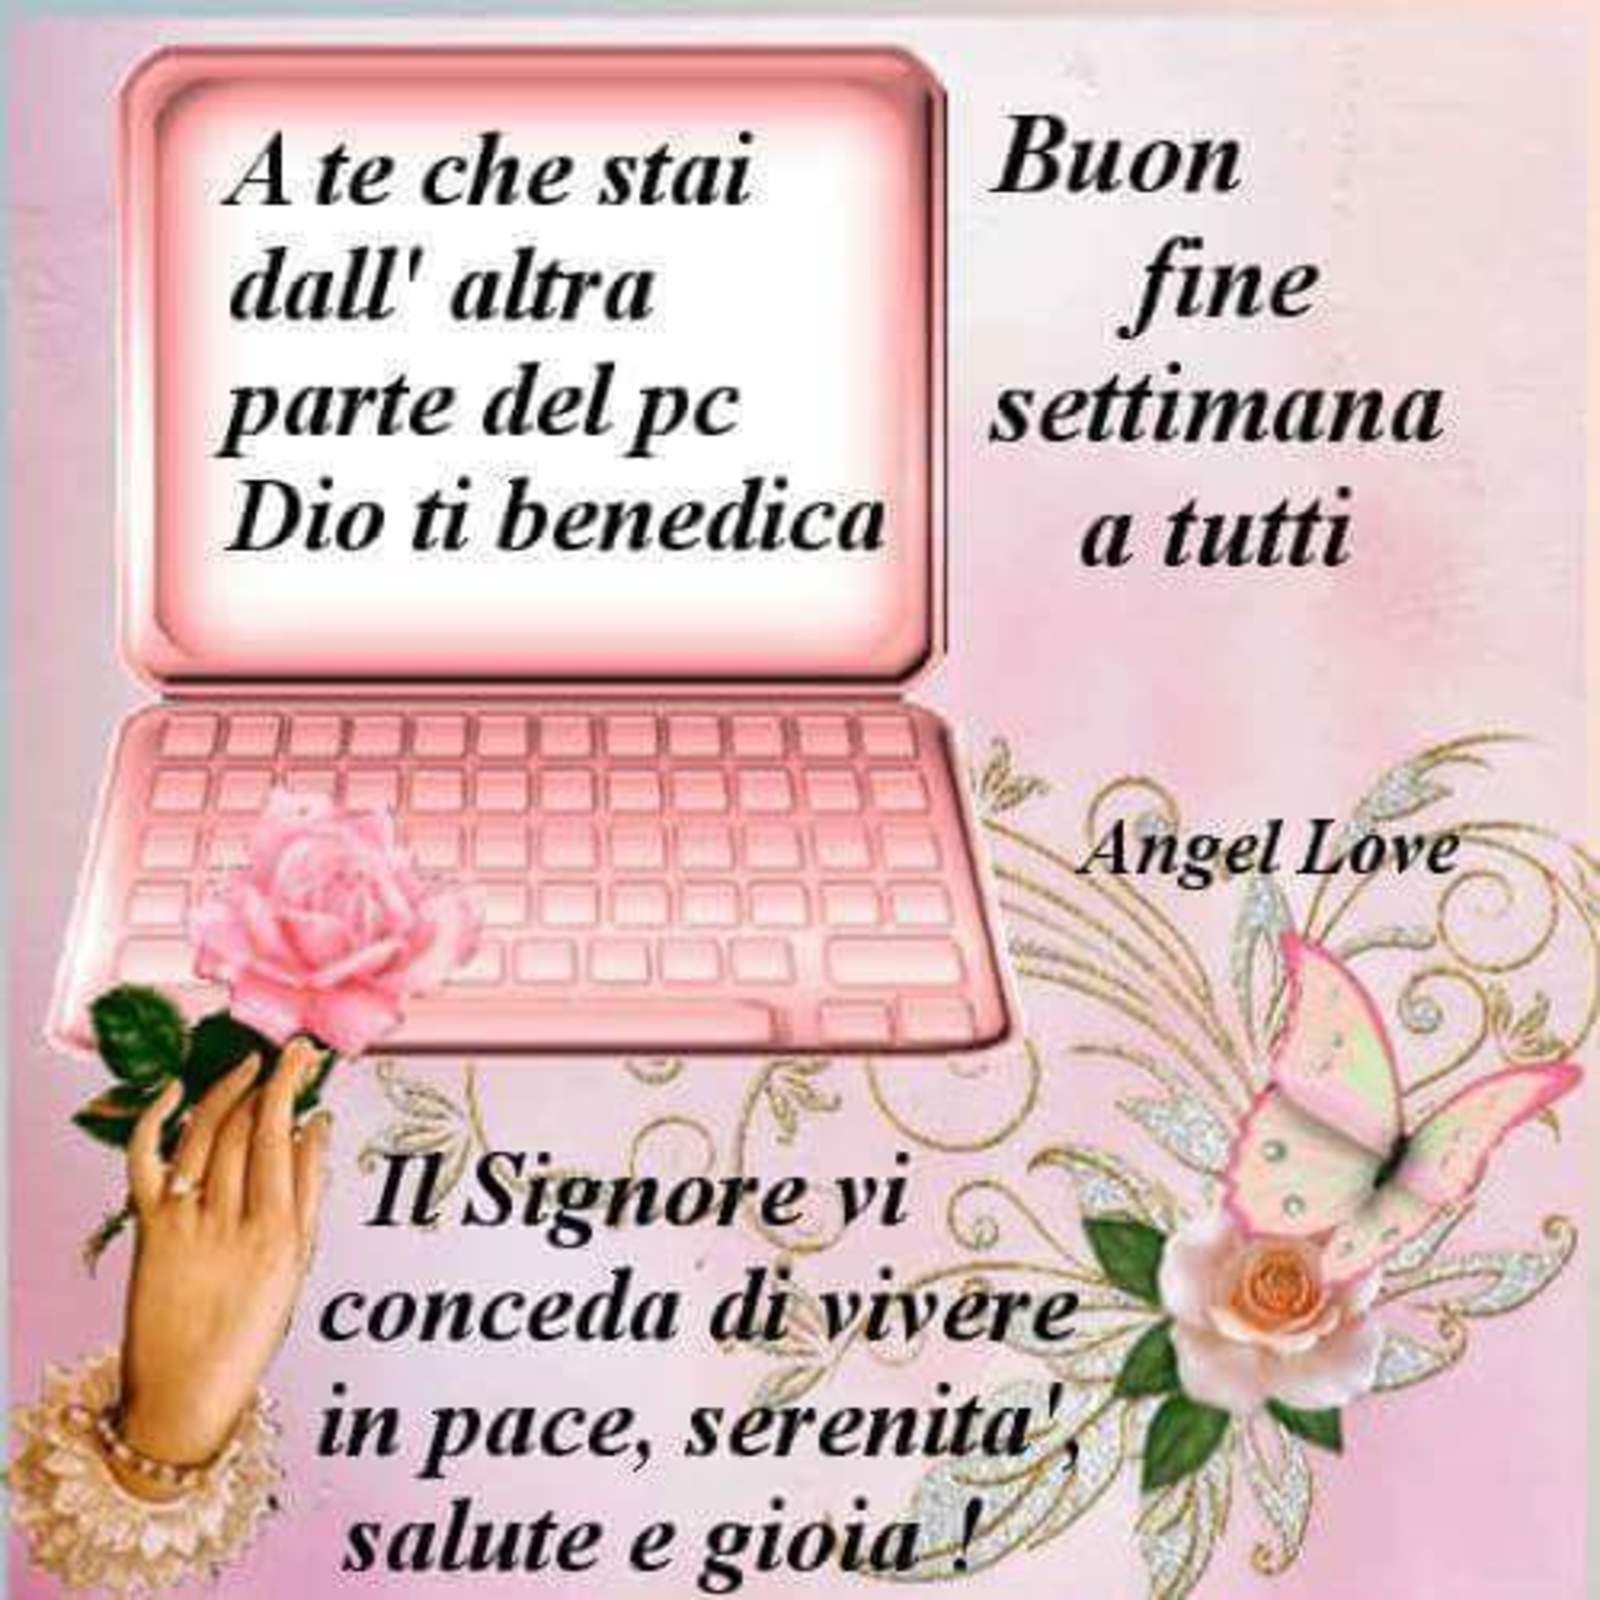 Buon Week End nel Signore